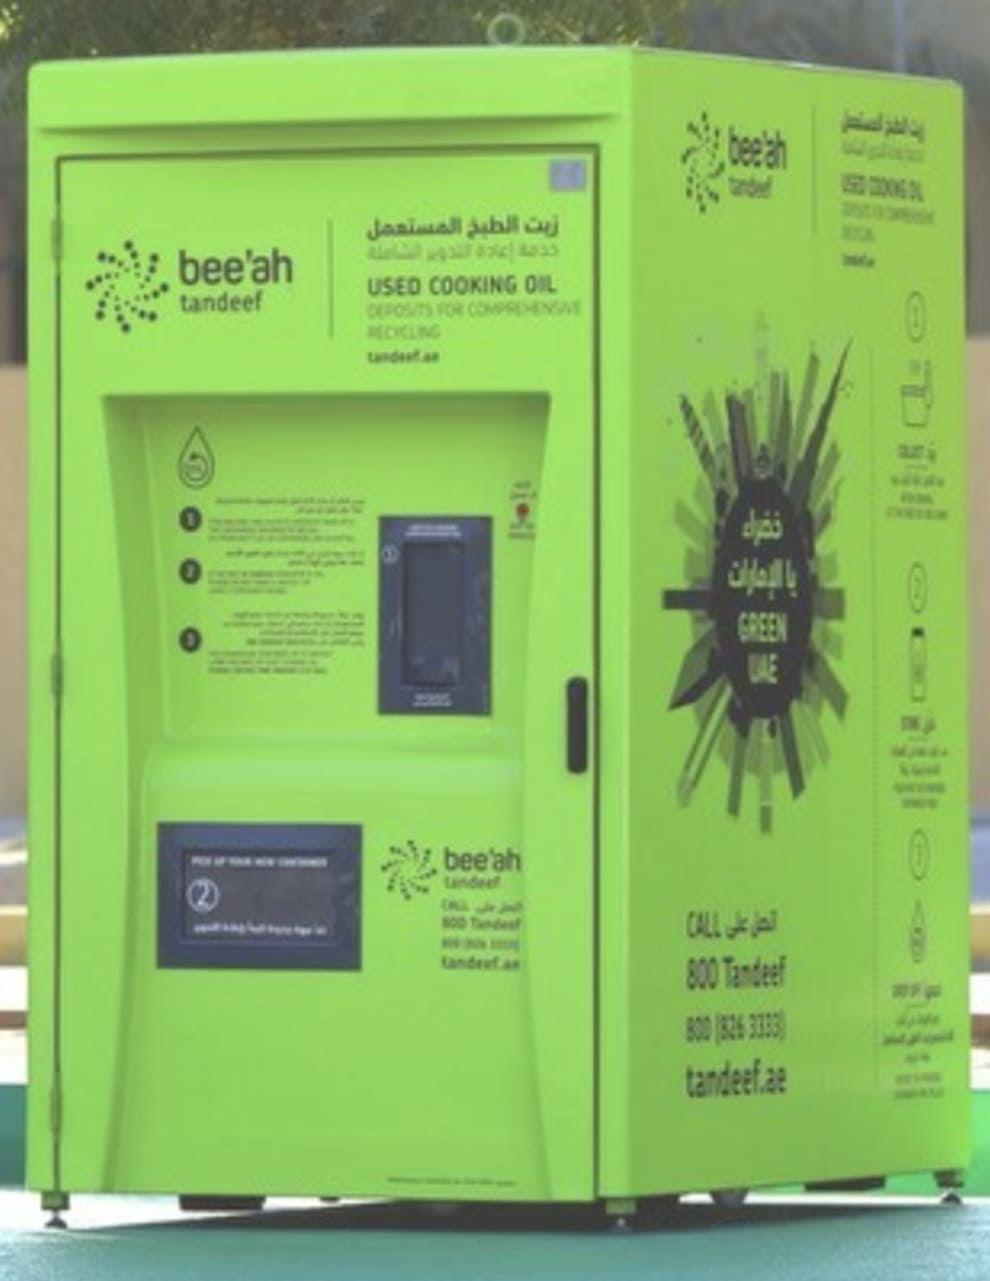 BEEAH Tandeef launches used cooking oil deposit machines to reduce waste and produce biodiesel 